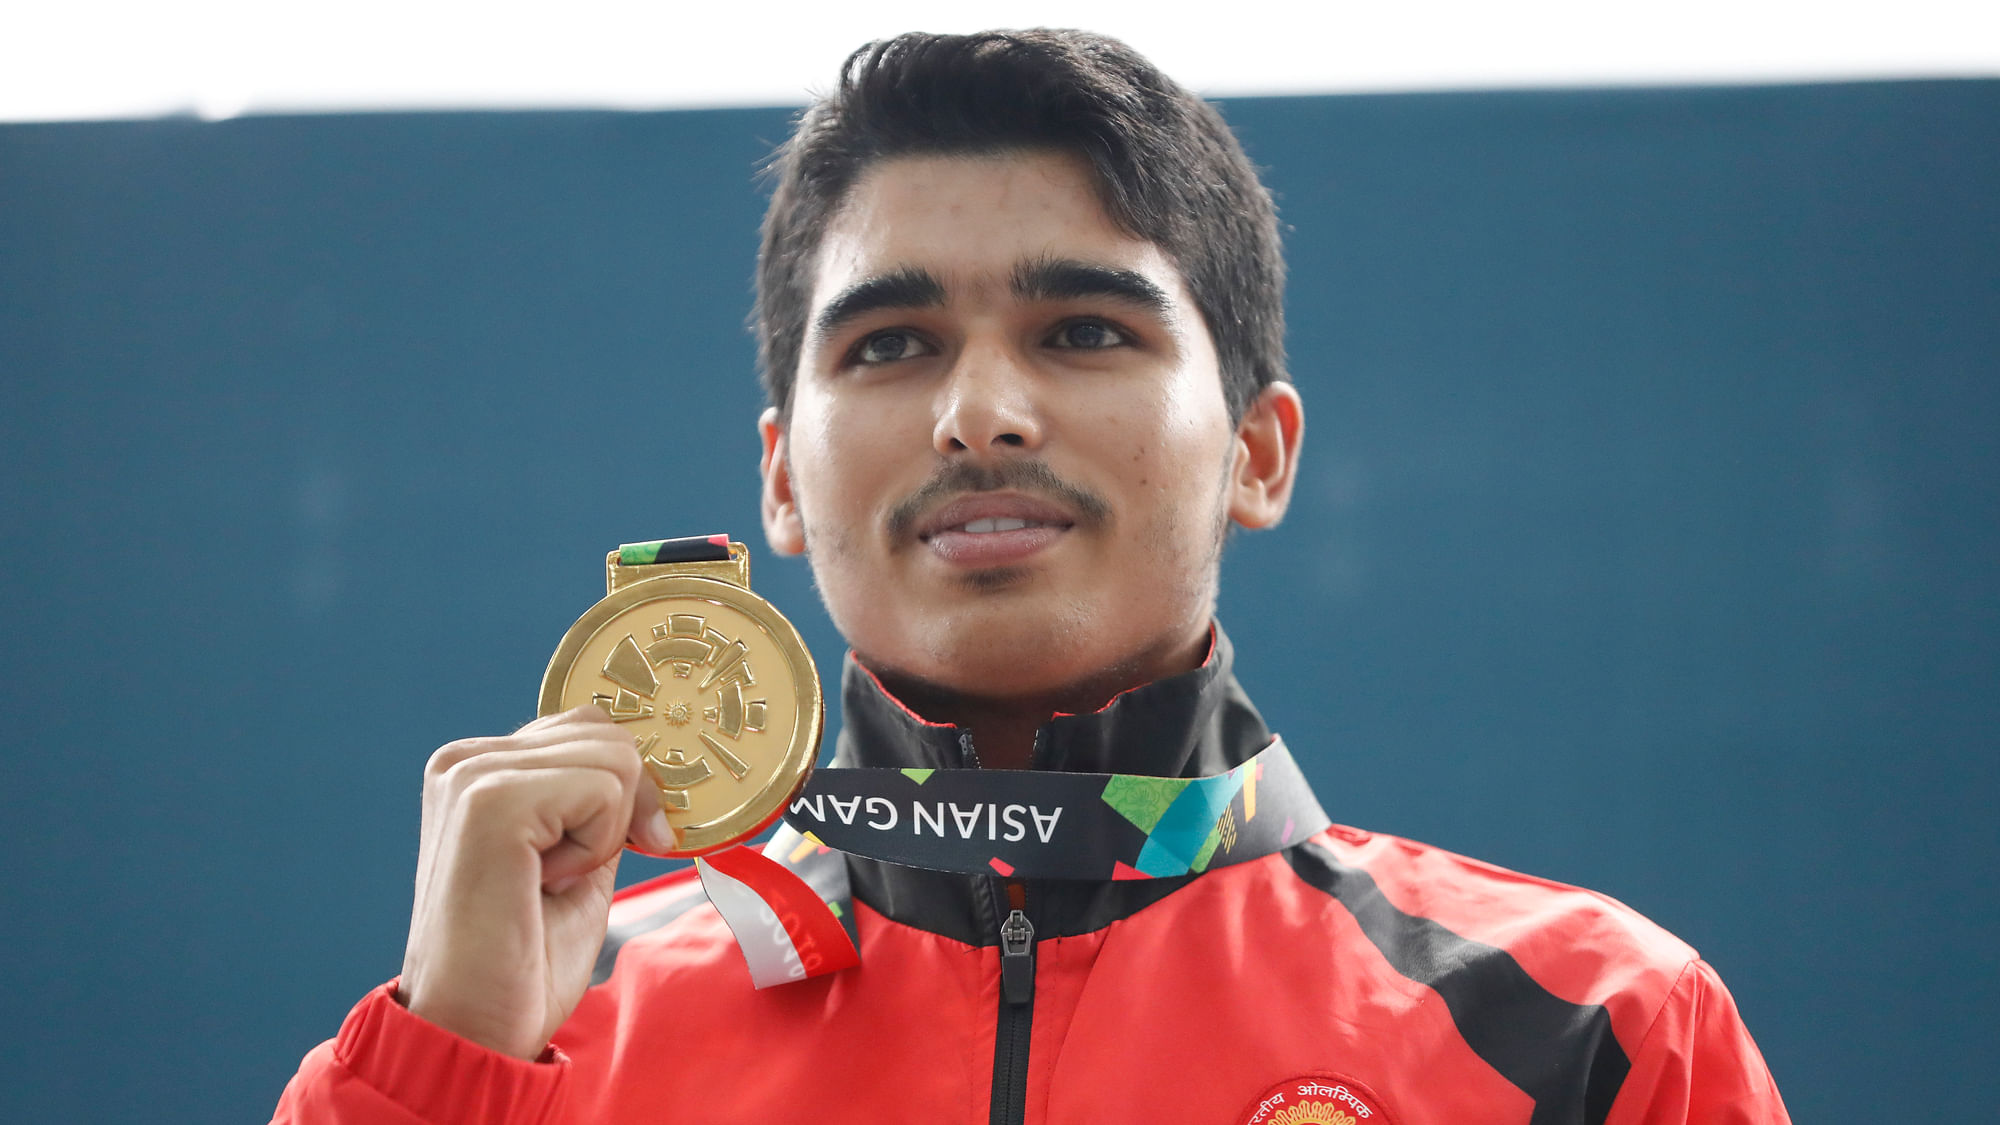 Debutant teenager Saurabh Chaudhary won India’s first shooting gold of the 18th Asian Games.